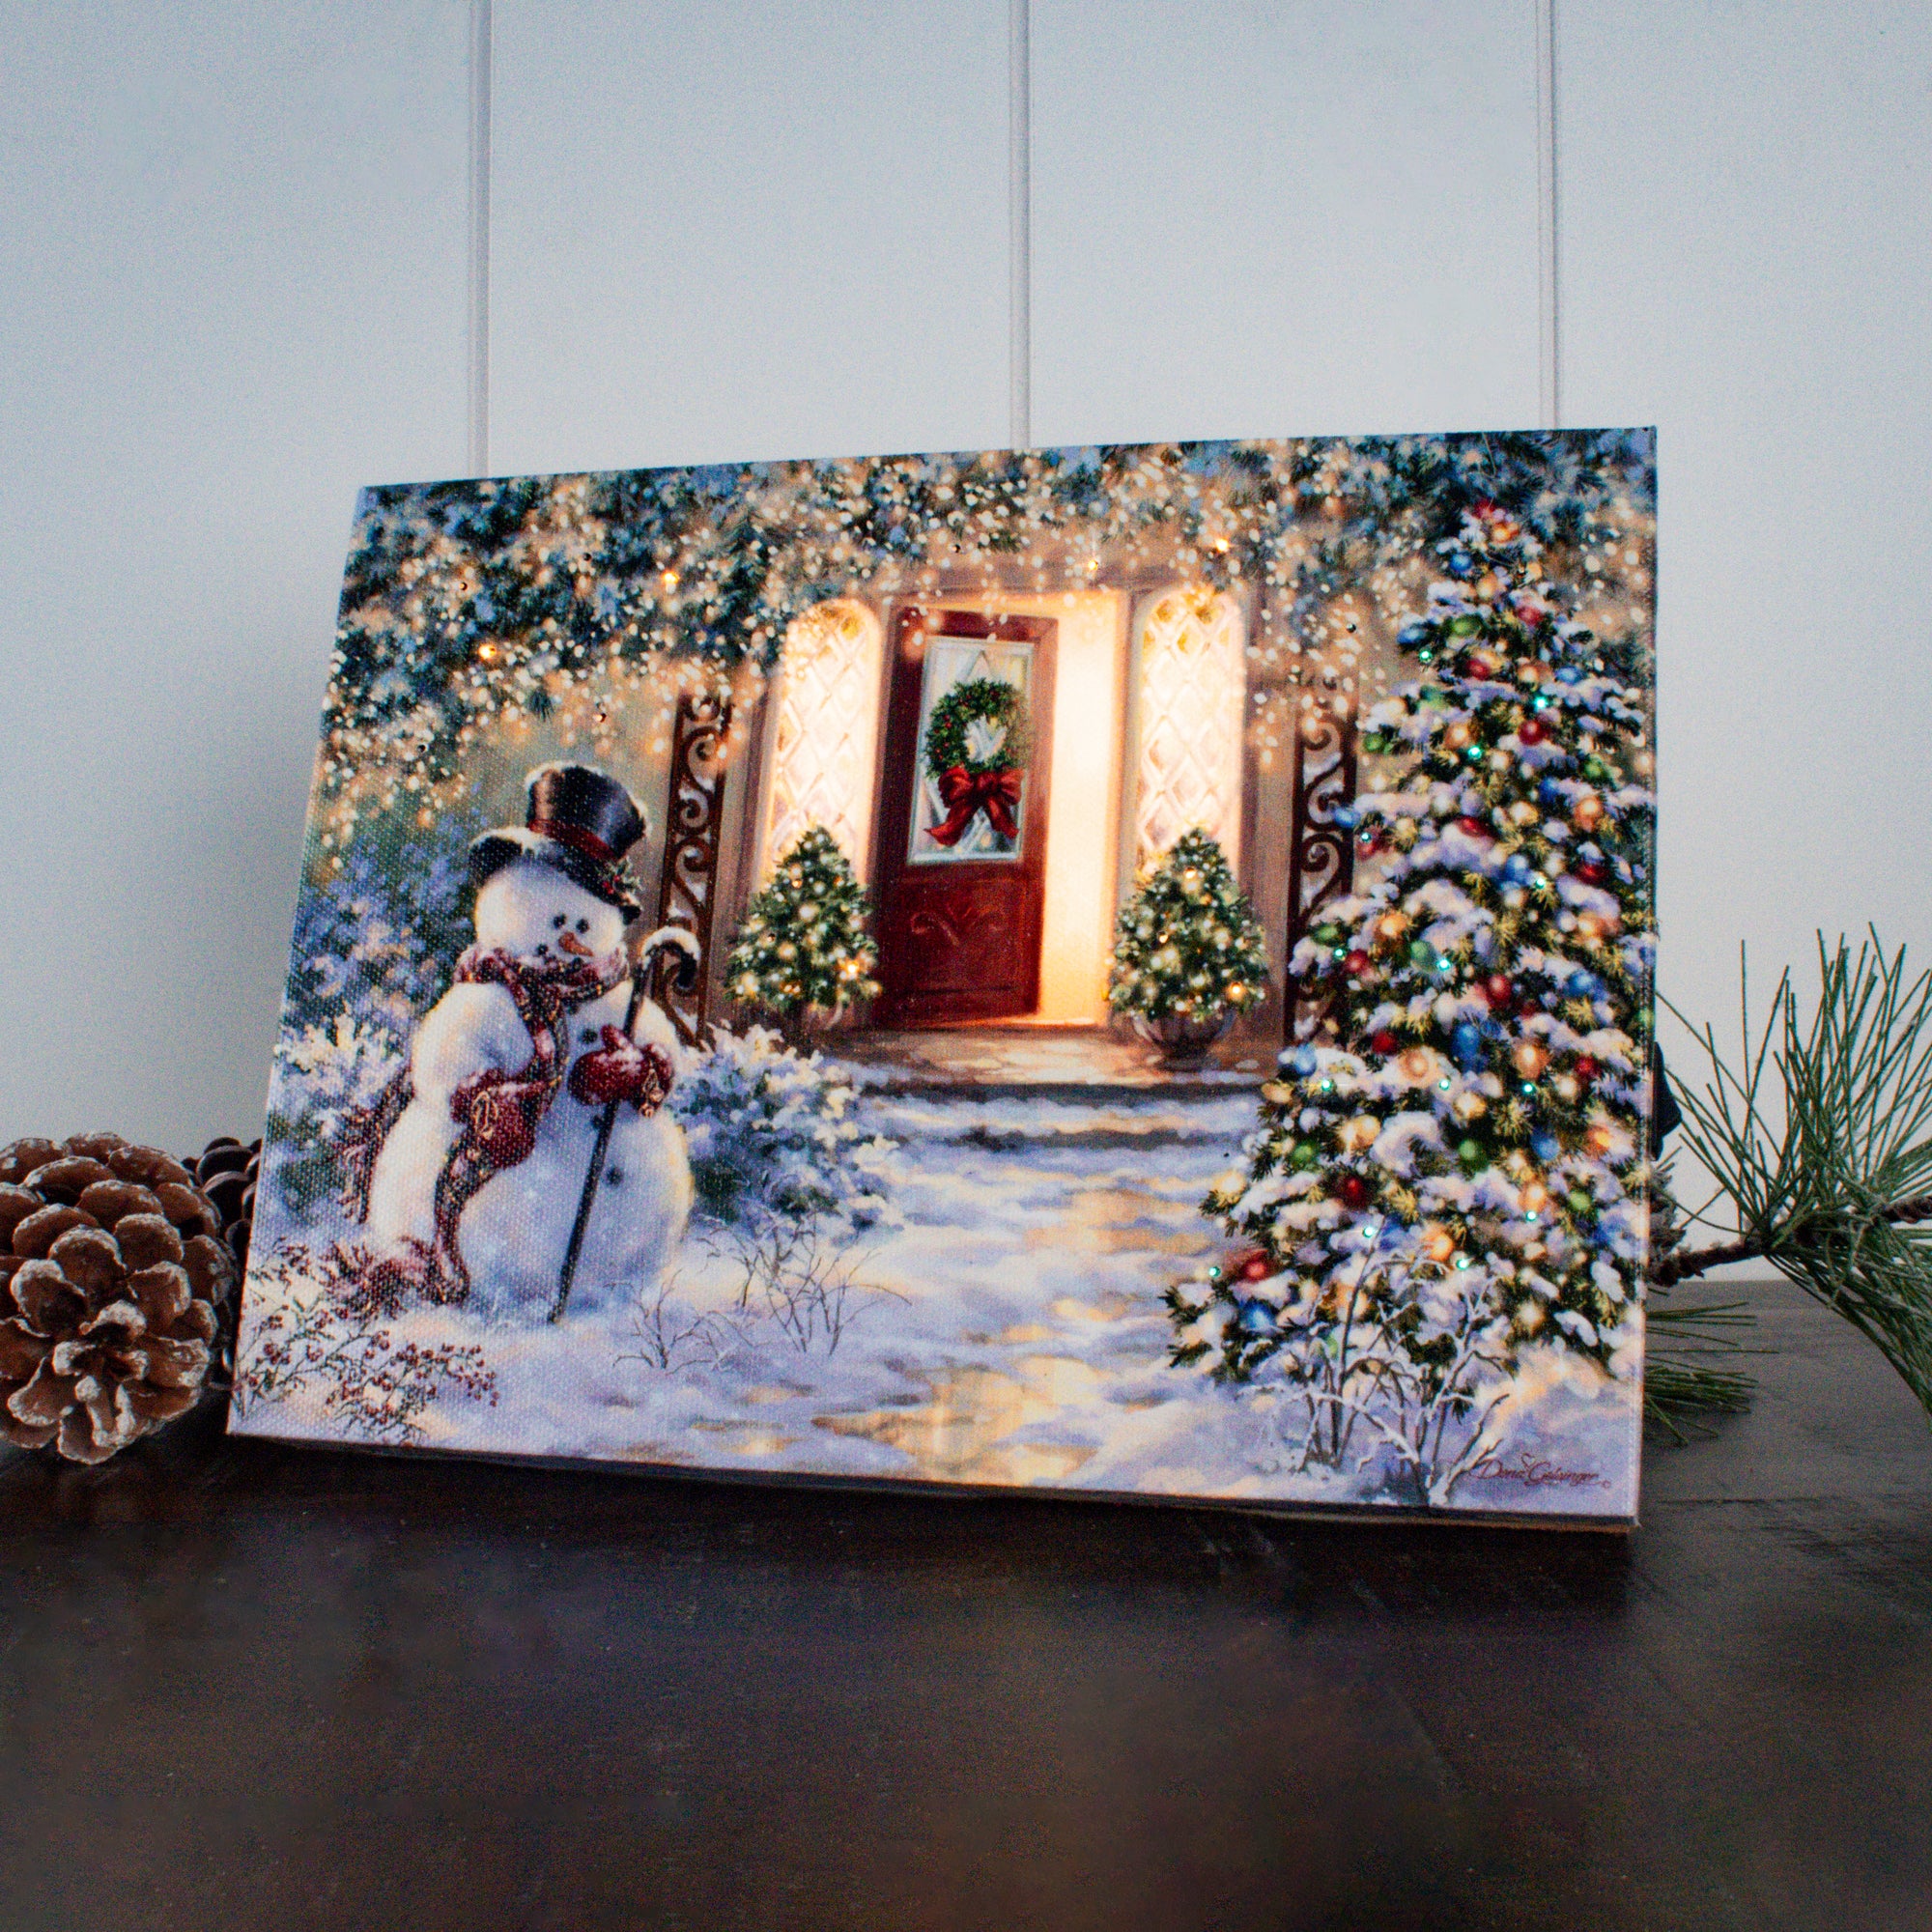 Home for the Holidays 8x6 Lighted Tabletop Canvas